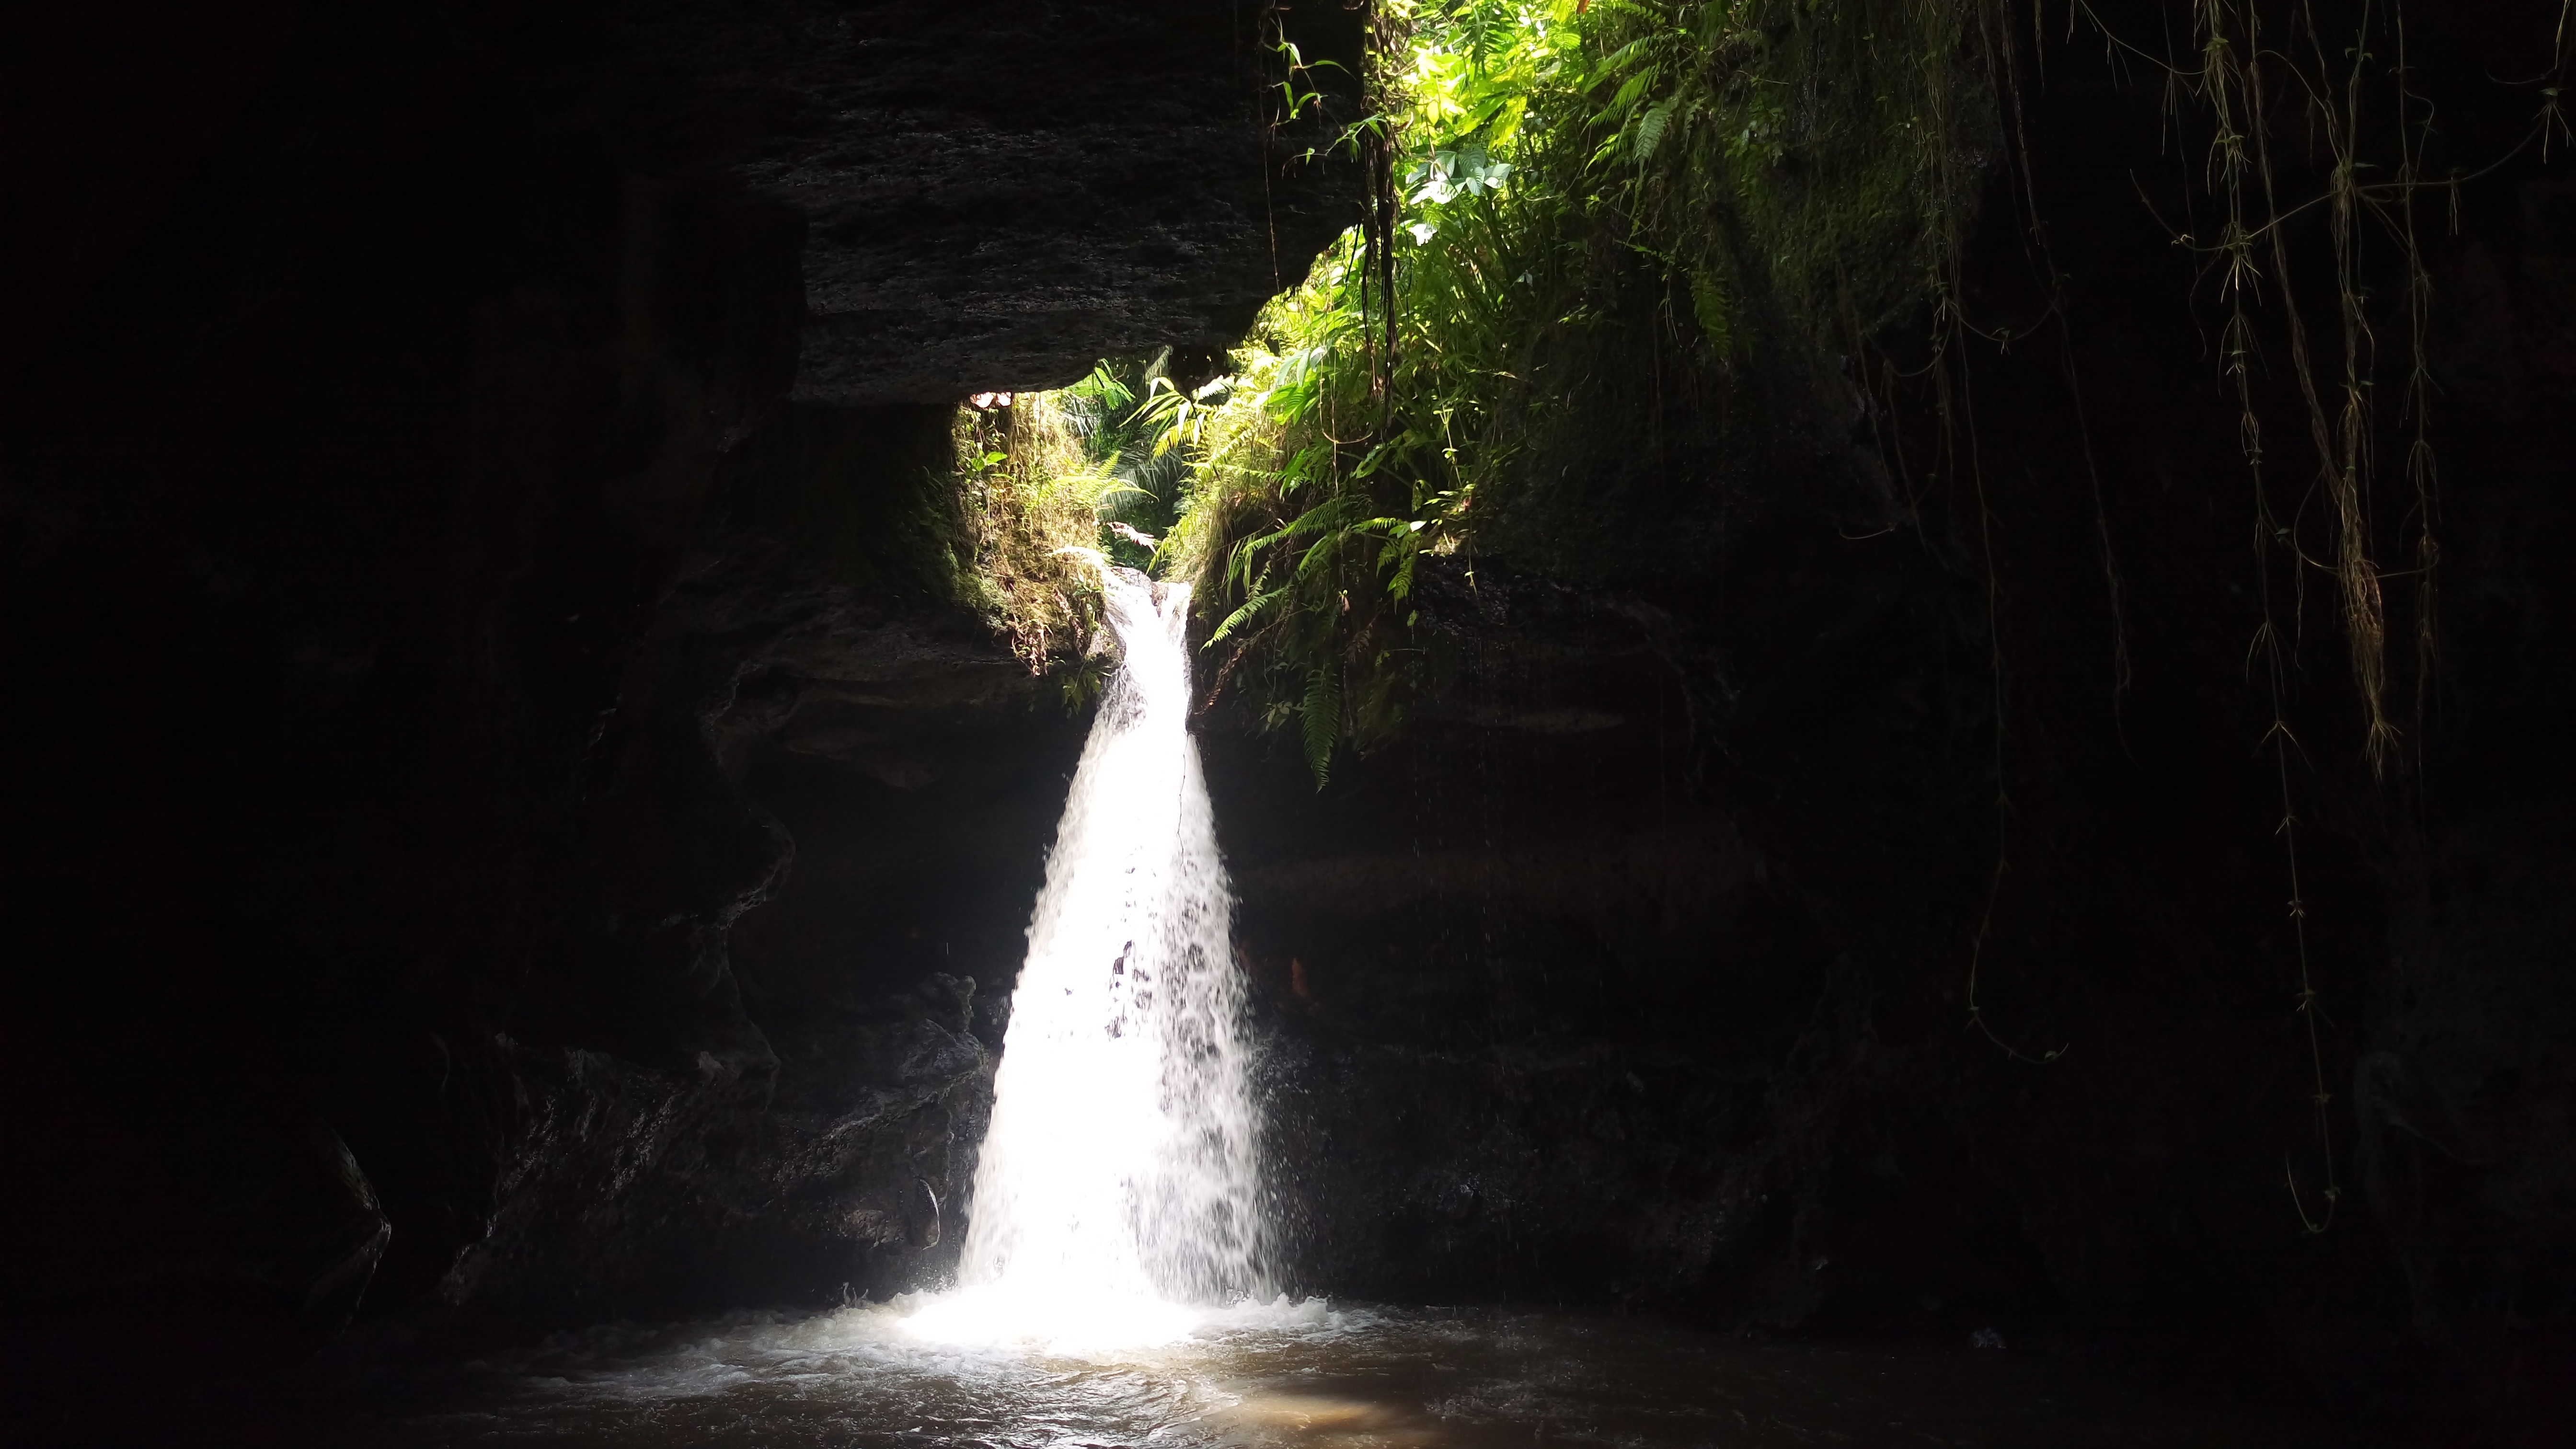 The tiny but powerful waterfall hidden in a cave